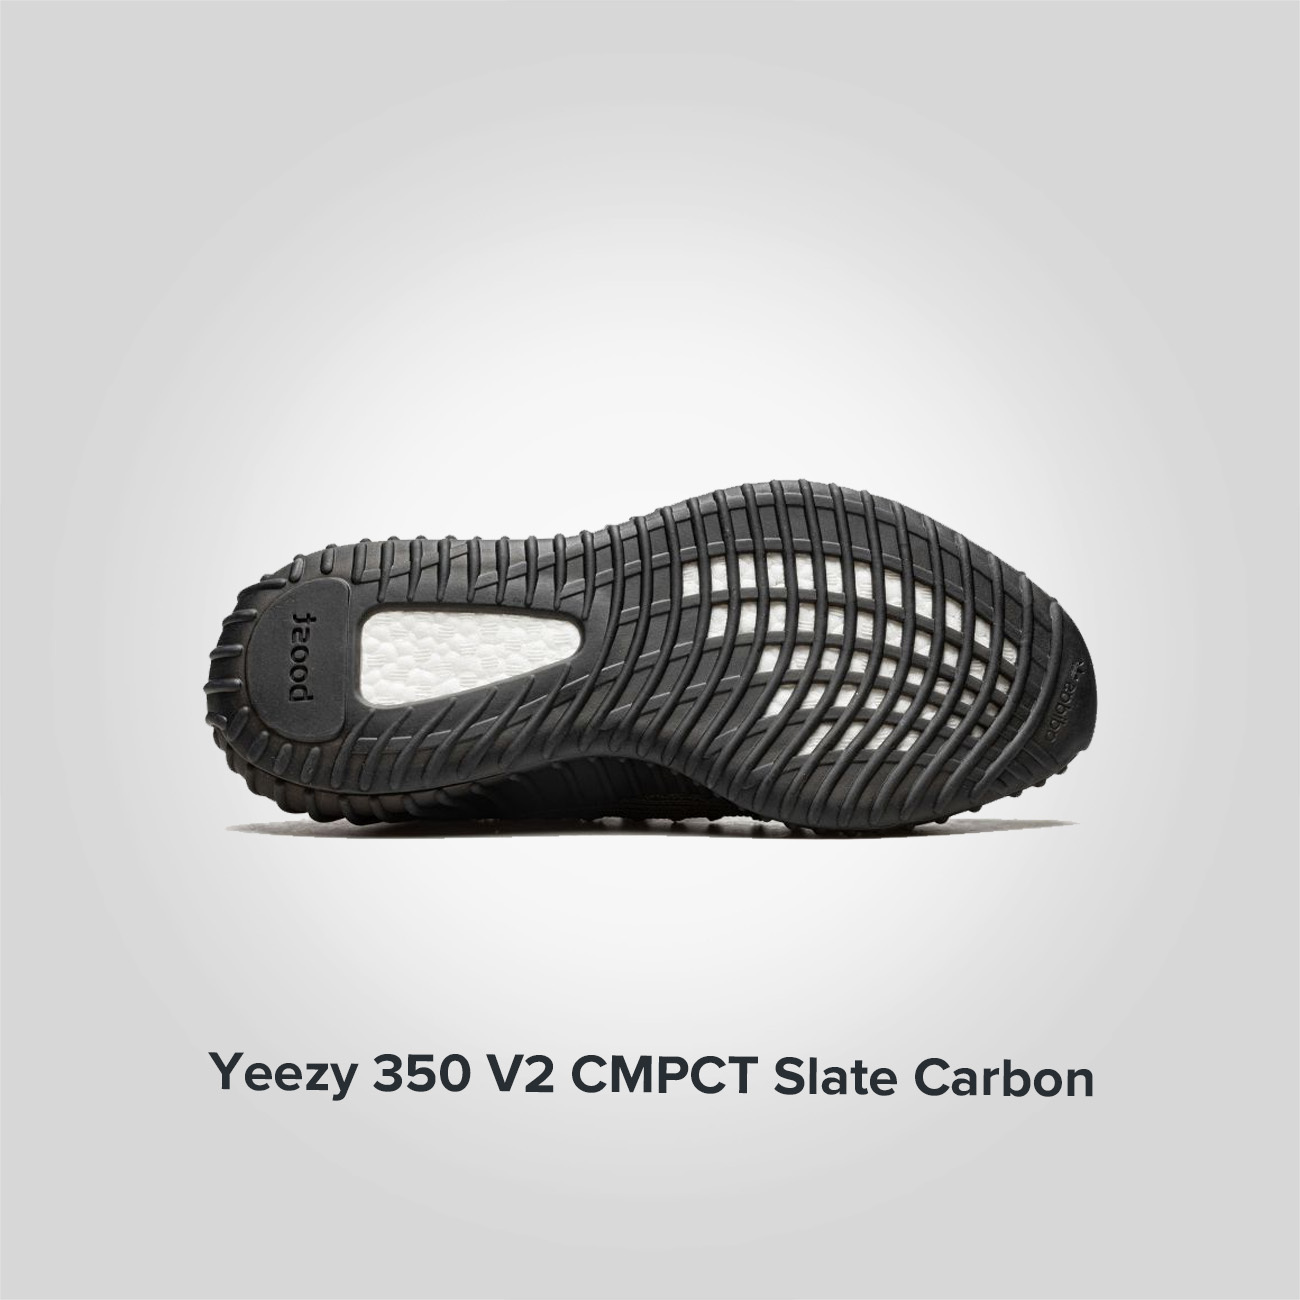 Yeezy Boost 350 V2 CMPCT Slate Carbon